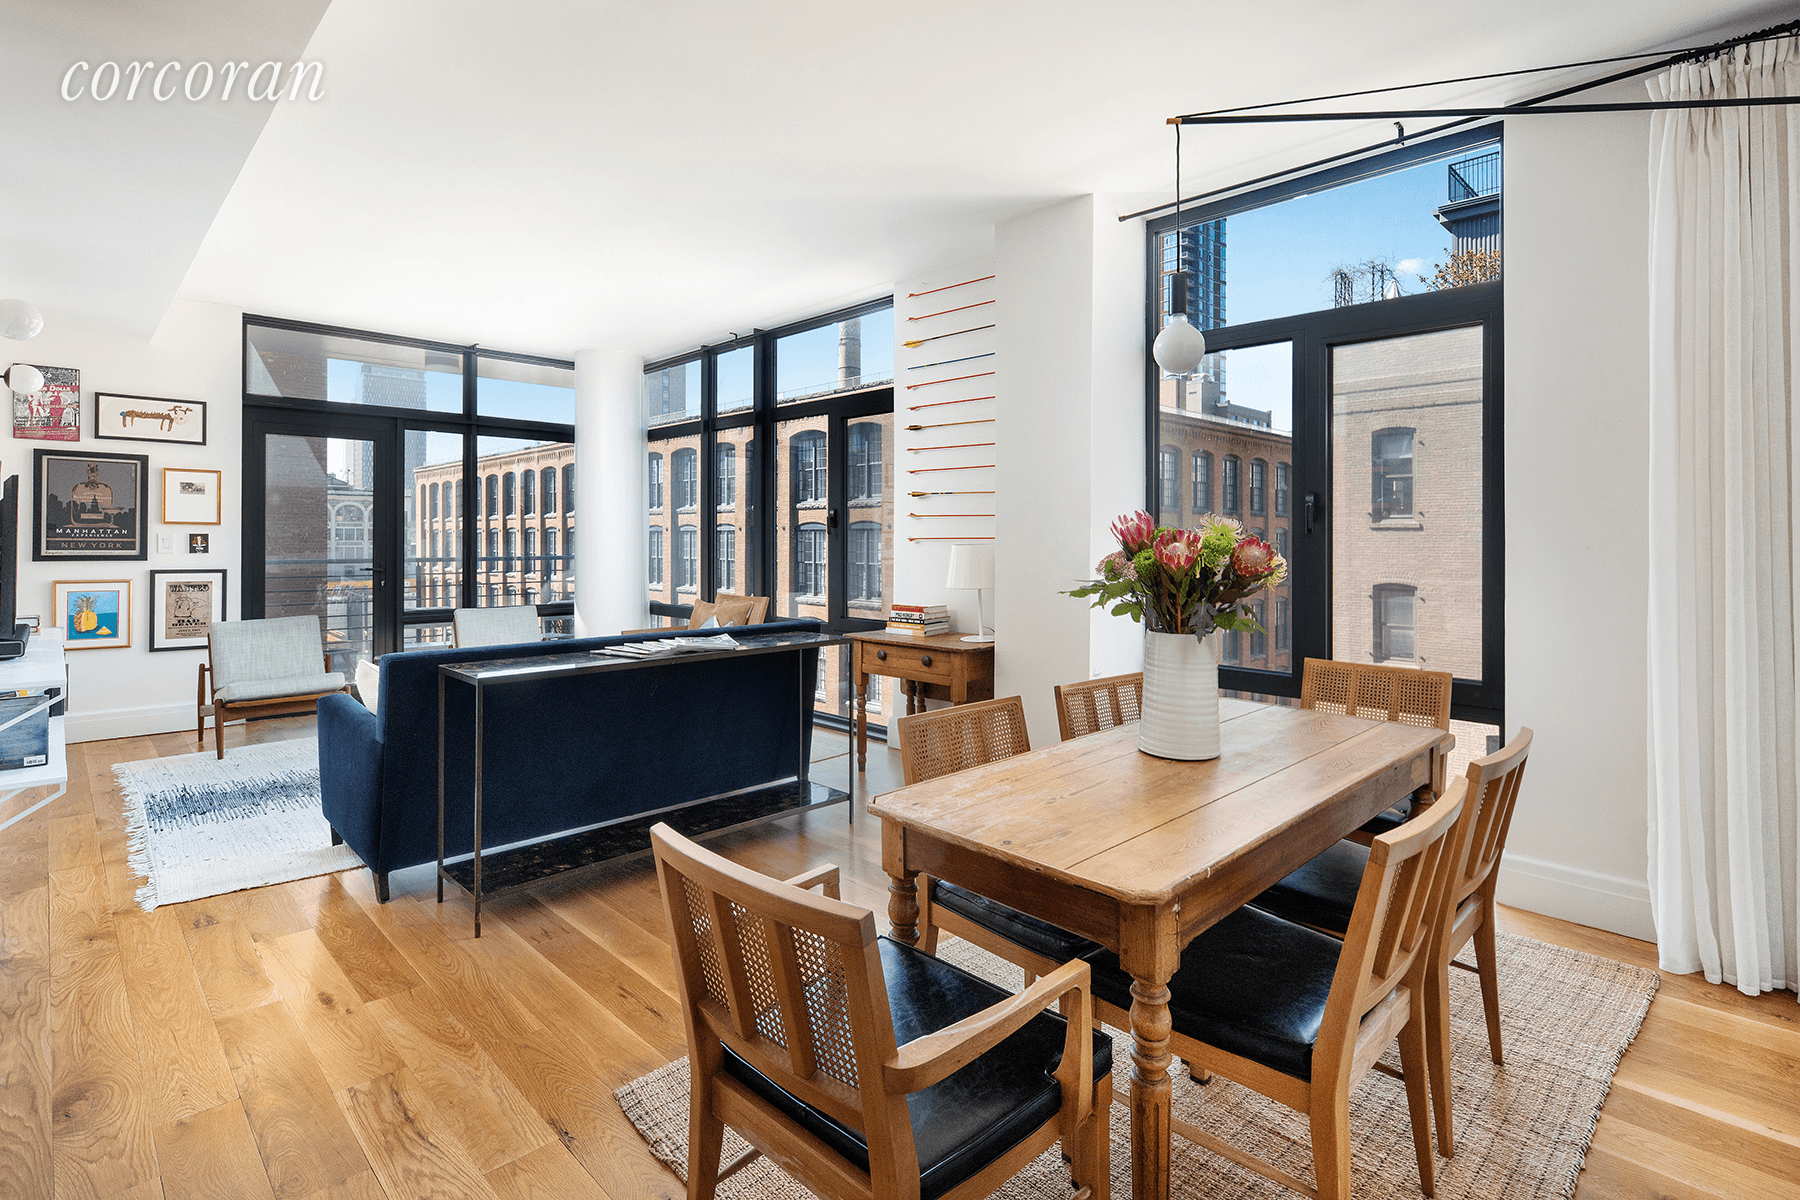 47 BRIDGE 5C SERIOUS PRICE REDUCTION 2, 075M REDUCED TO 1, 975M 3 POSSIBLE CORNER CONDOMINIUM OPTIONS FOR THE PRICE OF ONE DUMBO VINEGAR HILL BK PRIVATE PARKING AVAILABLE TAX ...